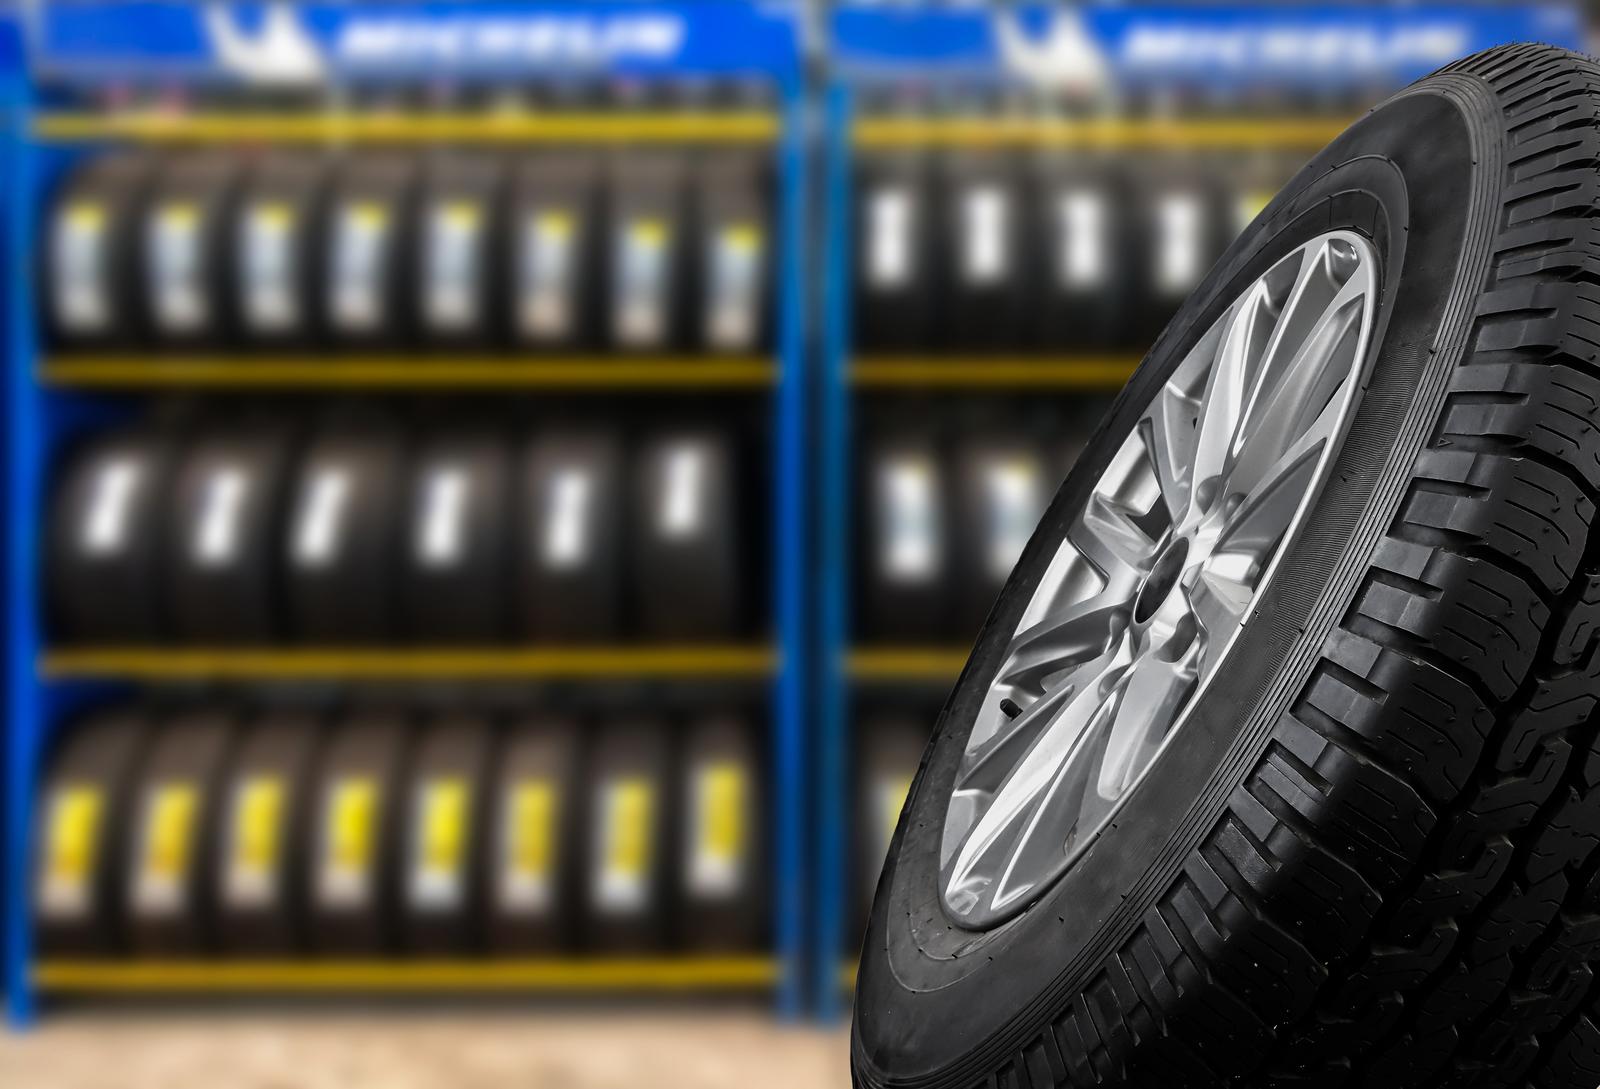 INGVARR OÜ - Manufacture of rubber tyres and tubes; retreading and rebuilding of rubber tyres in Estonia